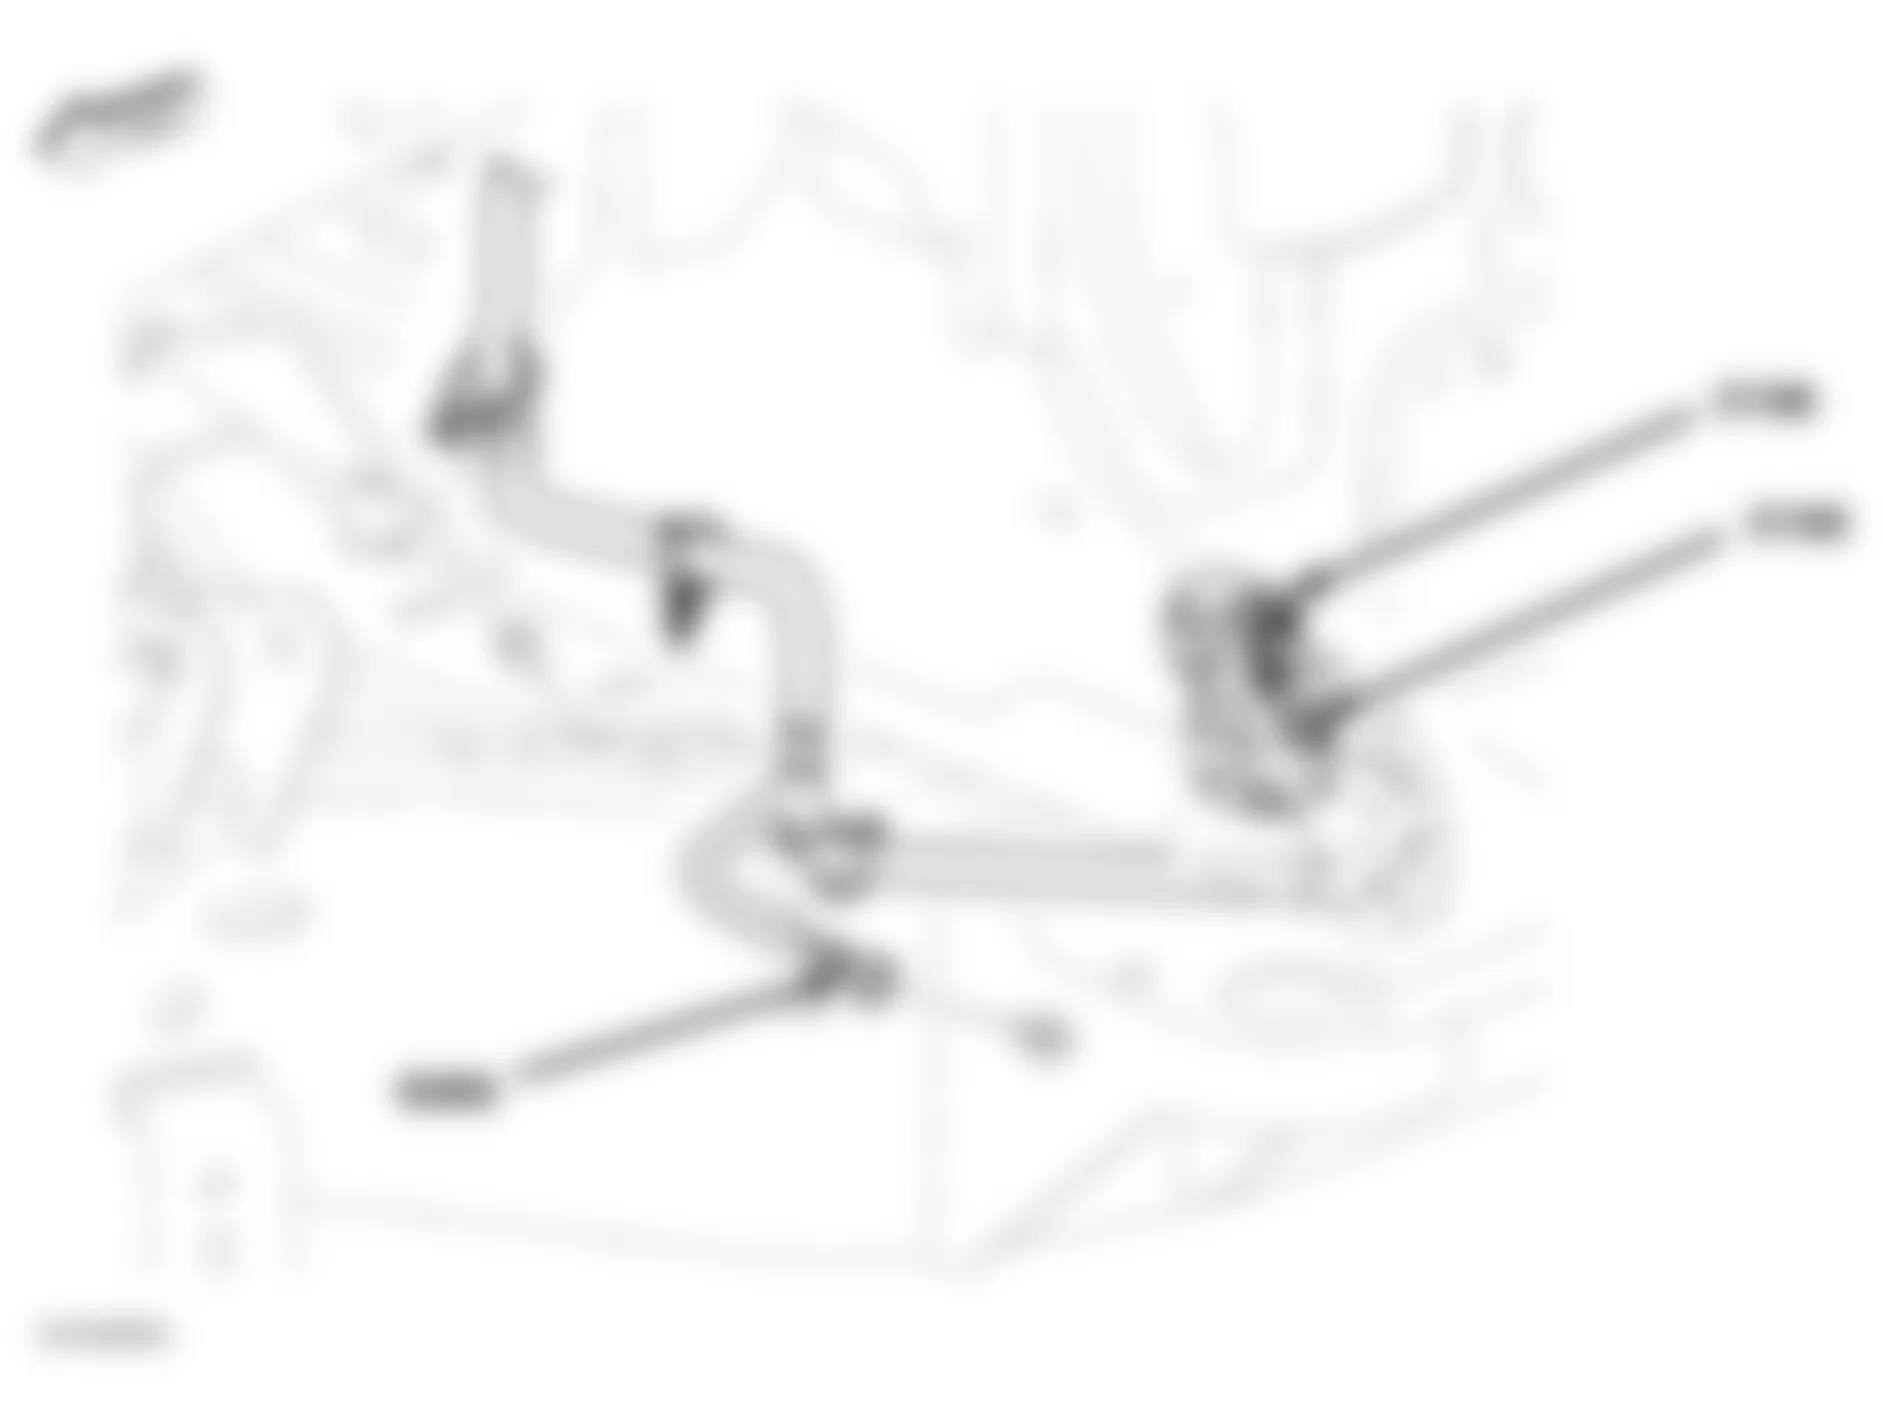 Dodge Dakota 2006 - Component Locations -  Lower Right Rear Of Engine Compartment